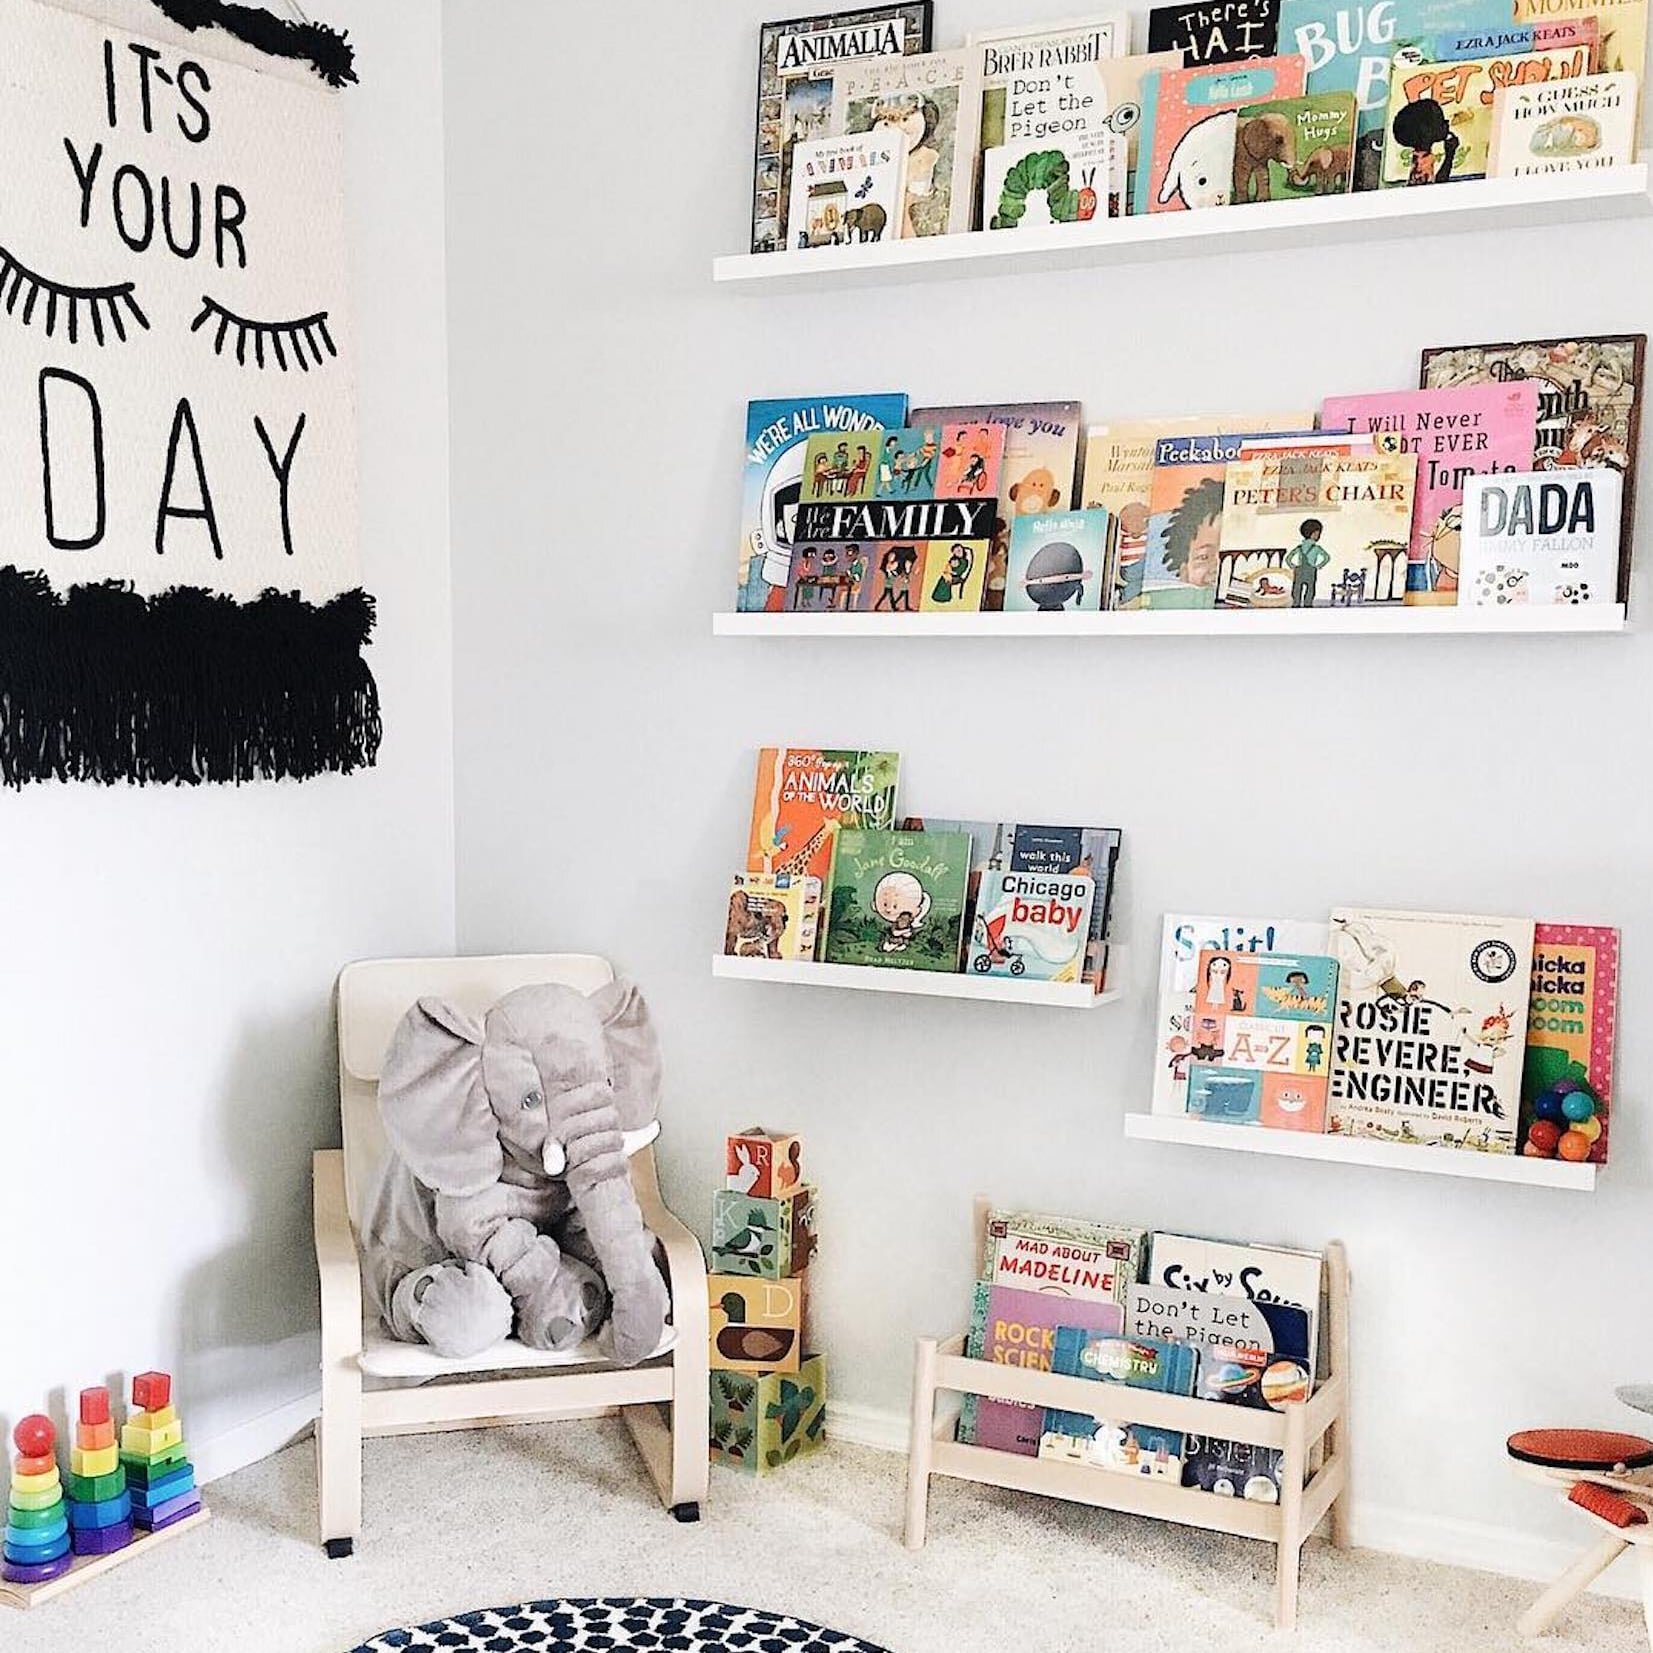 10 Creative Reading Nook Ideas for Kids